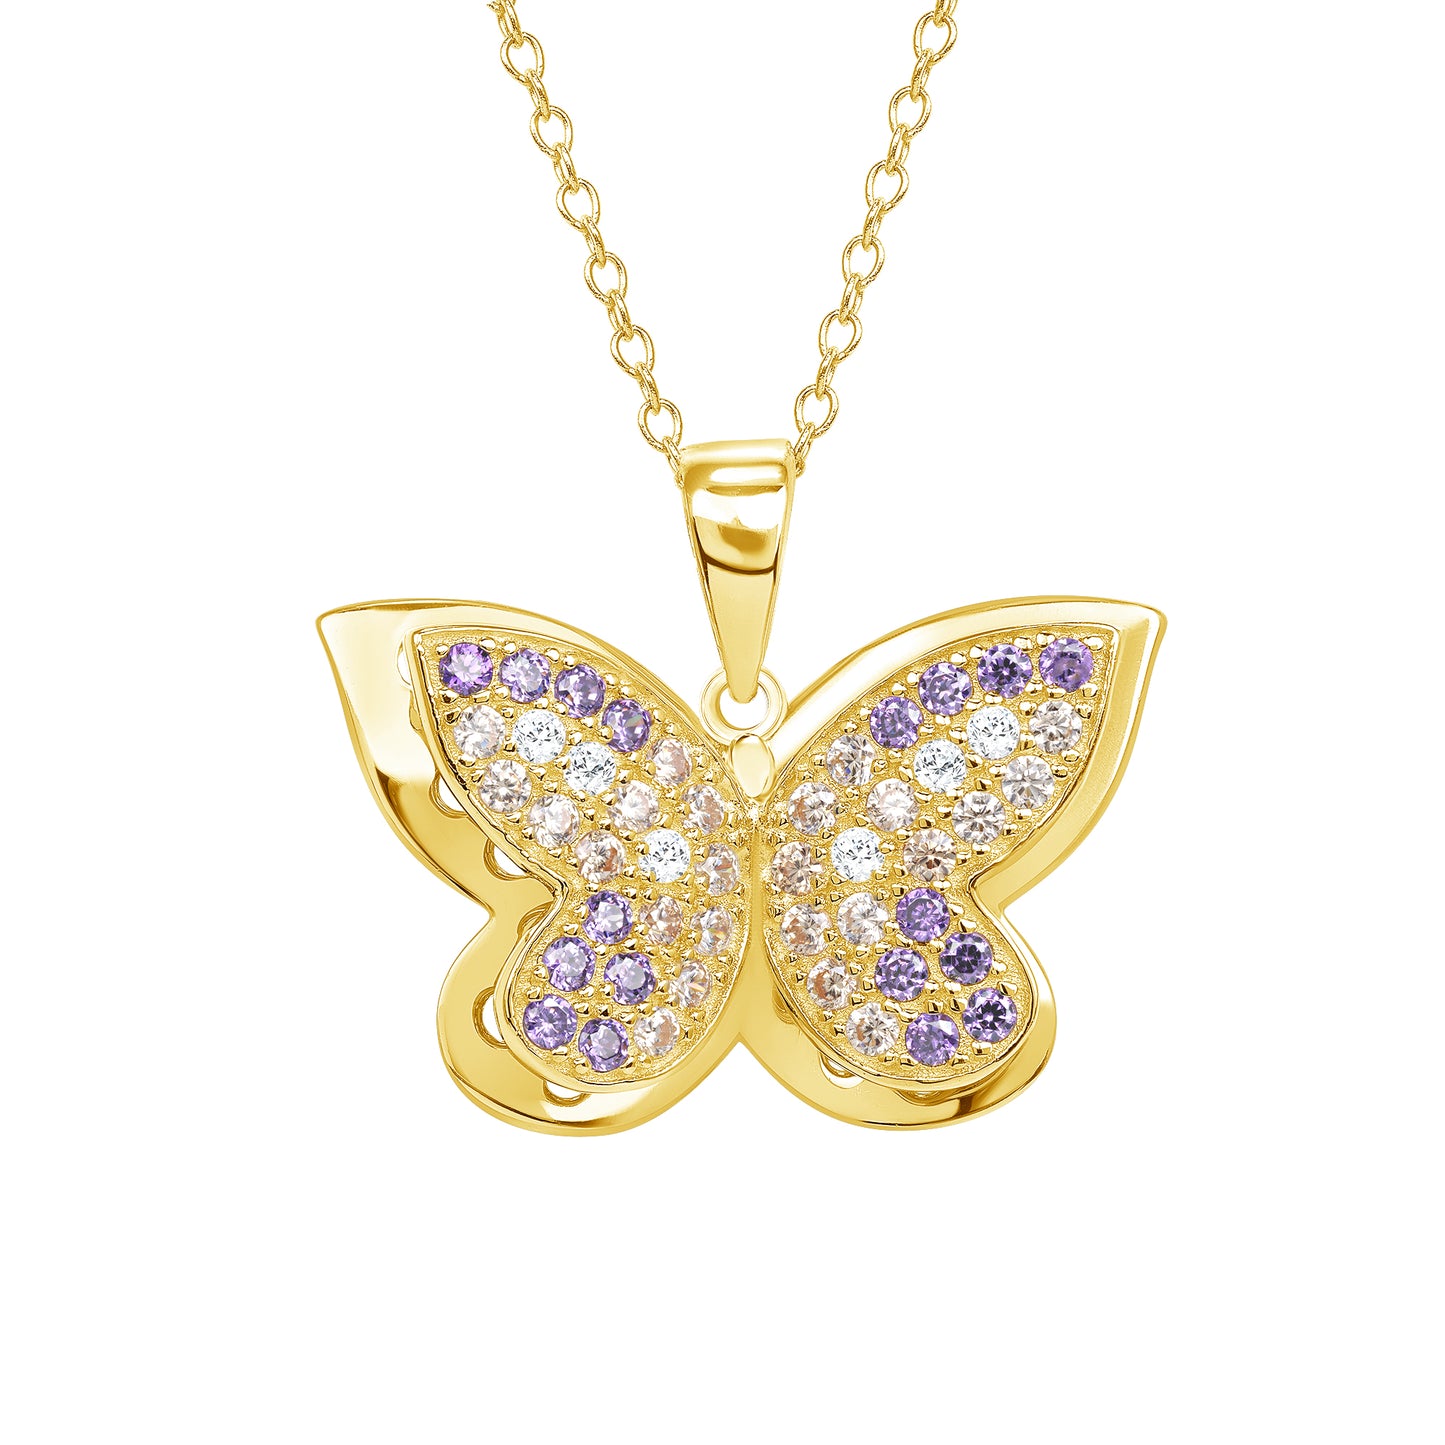 DGP1341GP. Silver 925 Gold Plated Purple Cubic Zirconia Butterfly Necklace